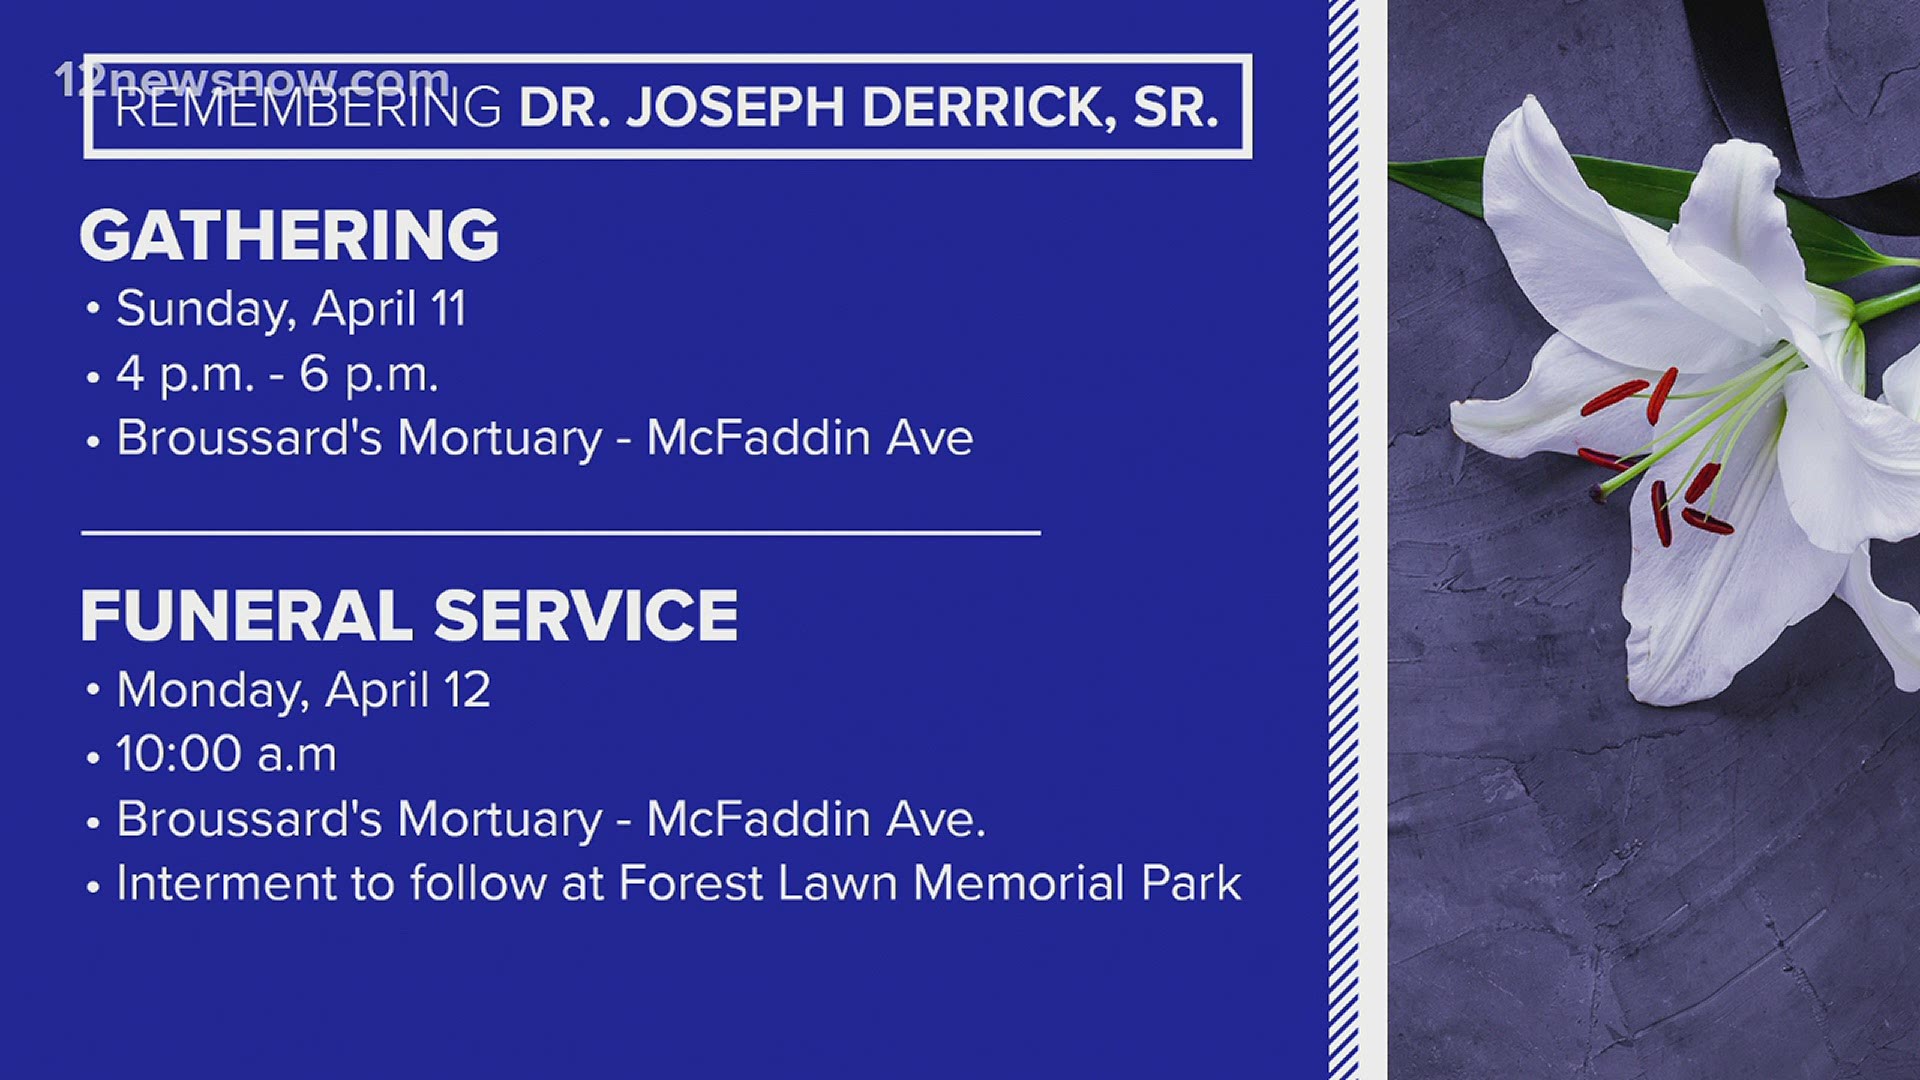 A service will be held Monday at Broussard's Mortuary in Beaumont.